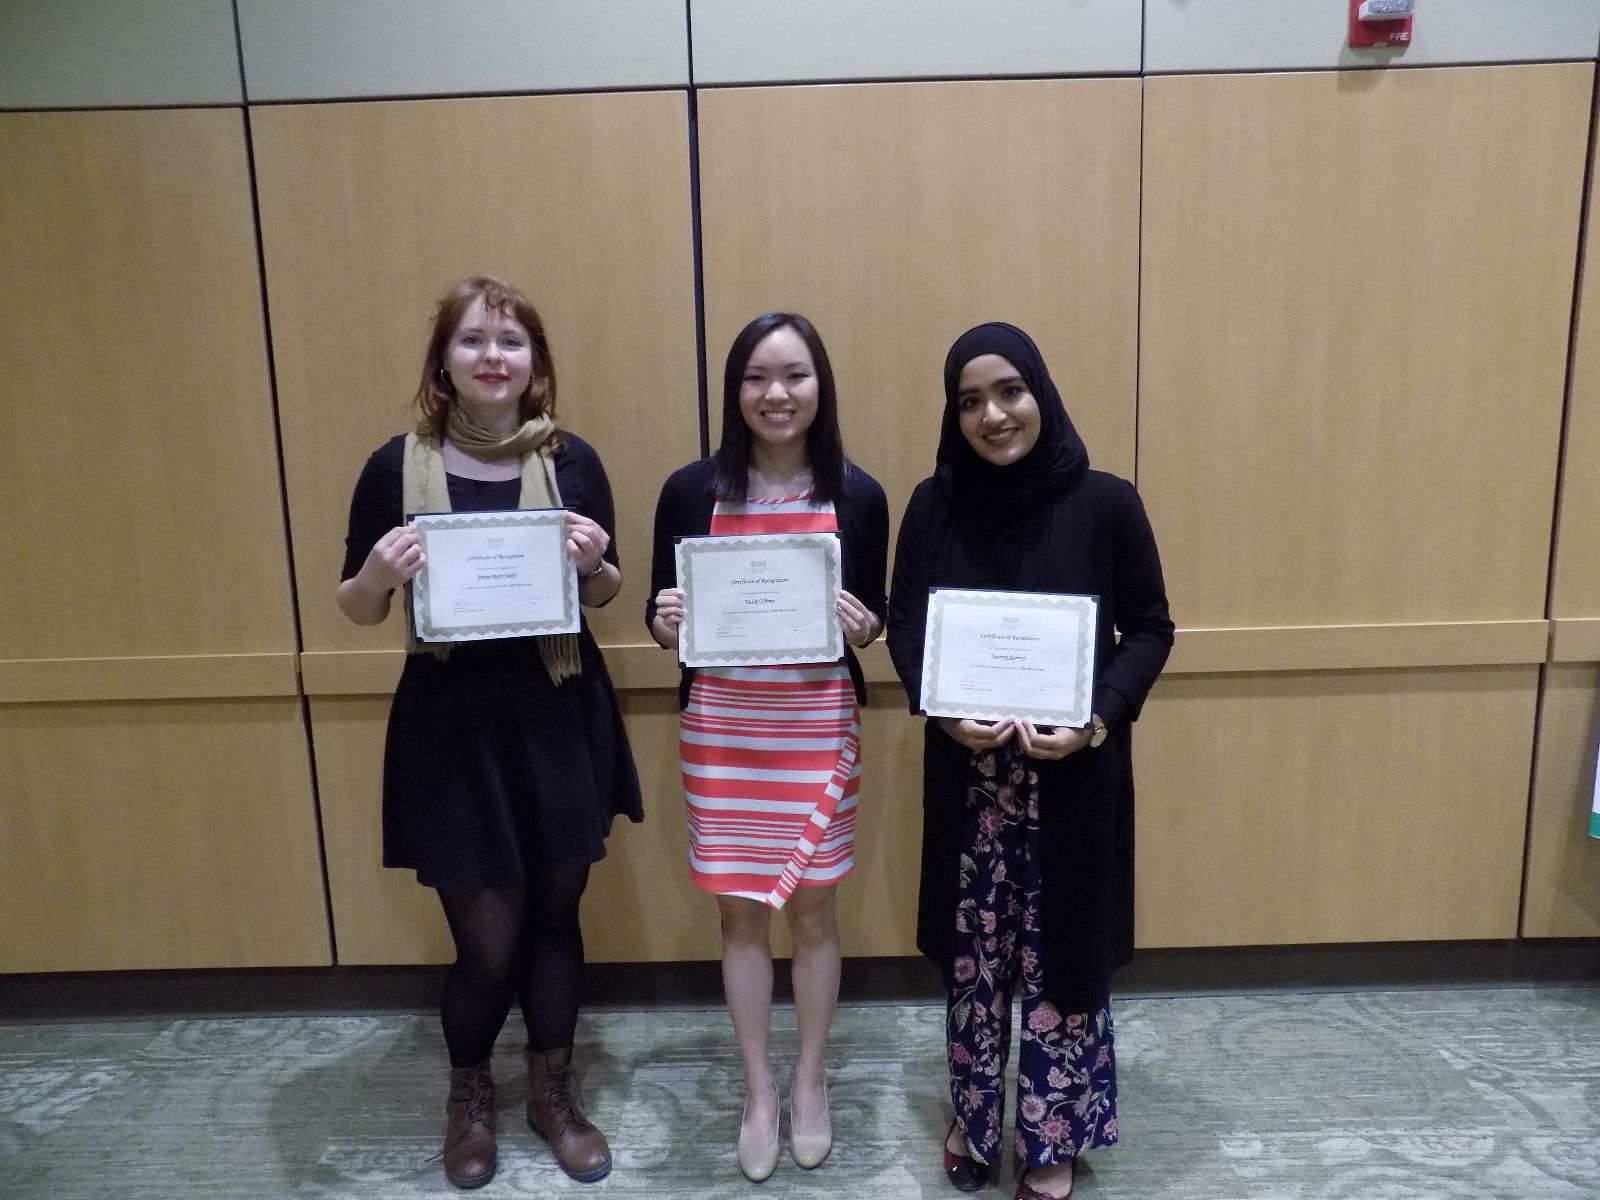 Students Amber Marie Taylor, Ki Lee Shannon O'Brien, and Nushrat Rahman were invited to join the Phi Beta Kappa honor society. (Not pictured: Delani Anne DeGrosky).